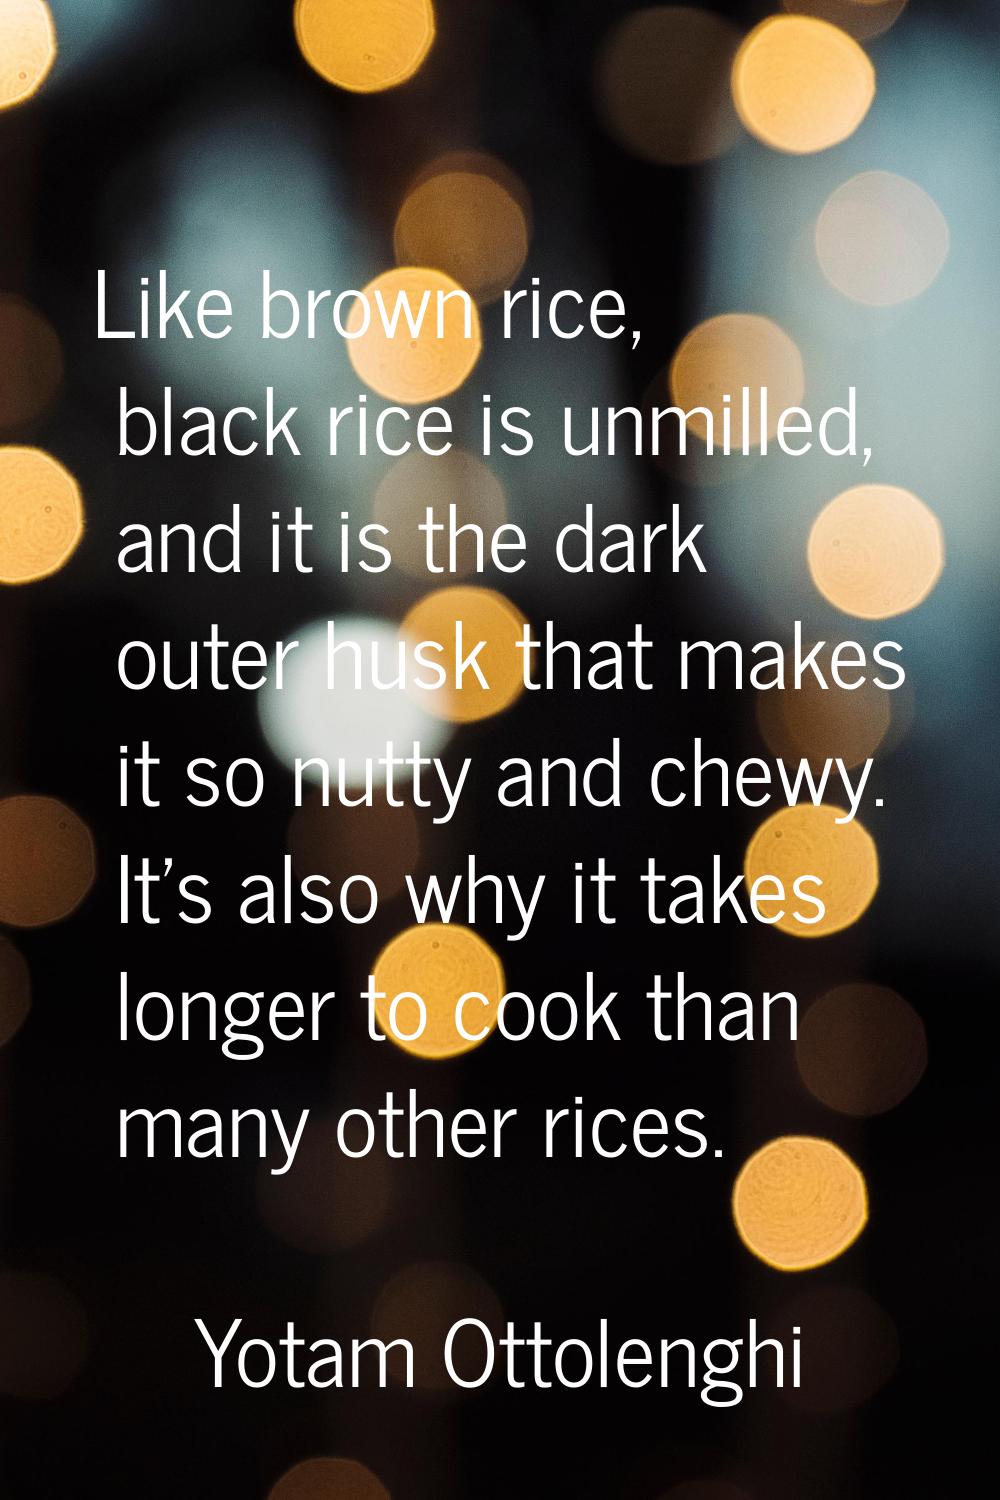 Like brown rice, black rice is unmilled, and it is the dark outer husk that makes it so nutty and c